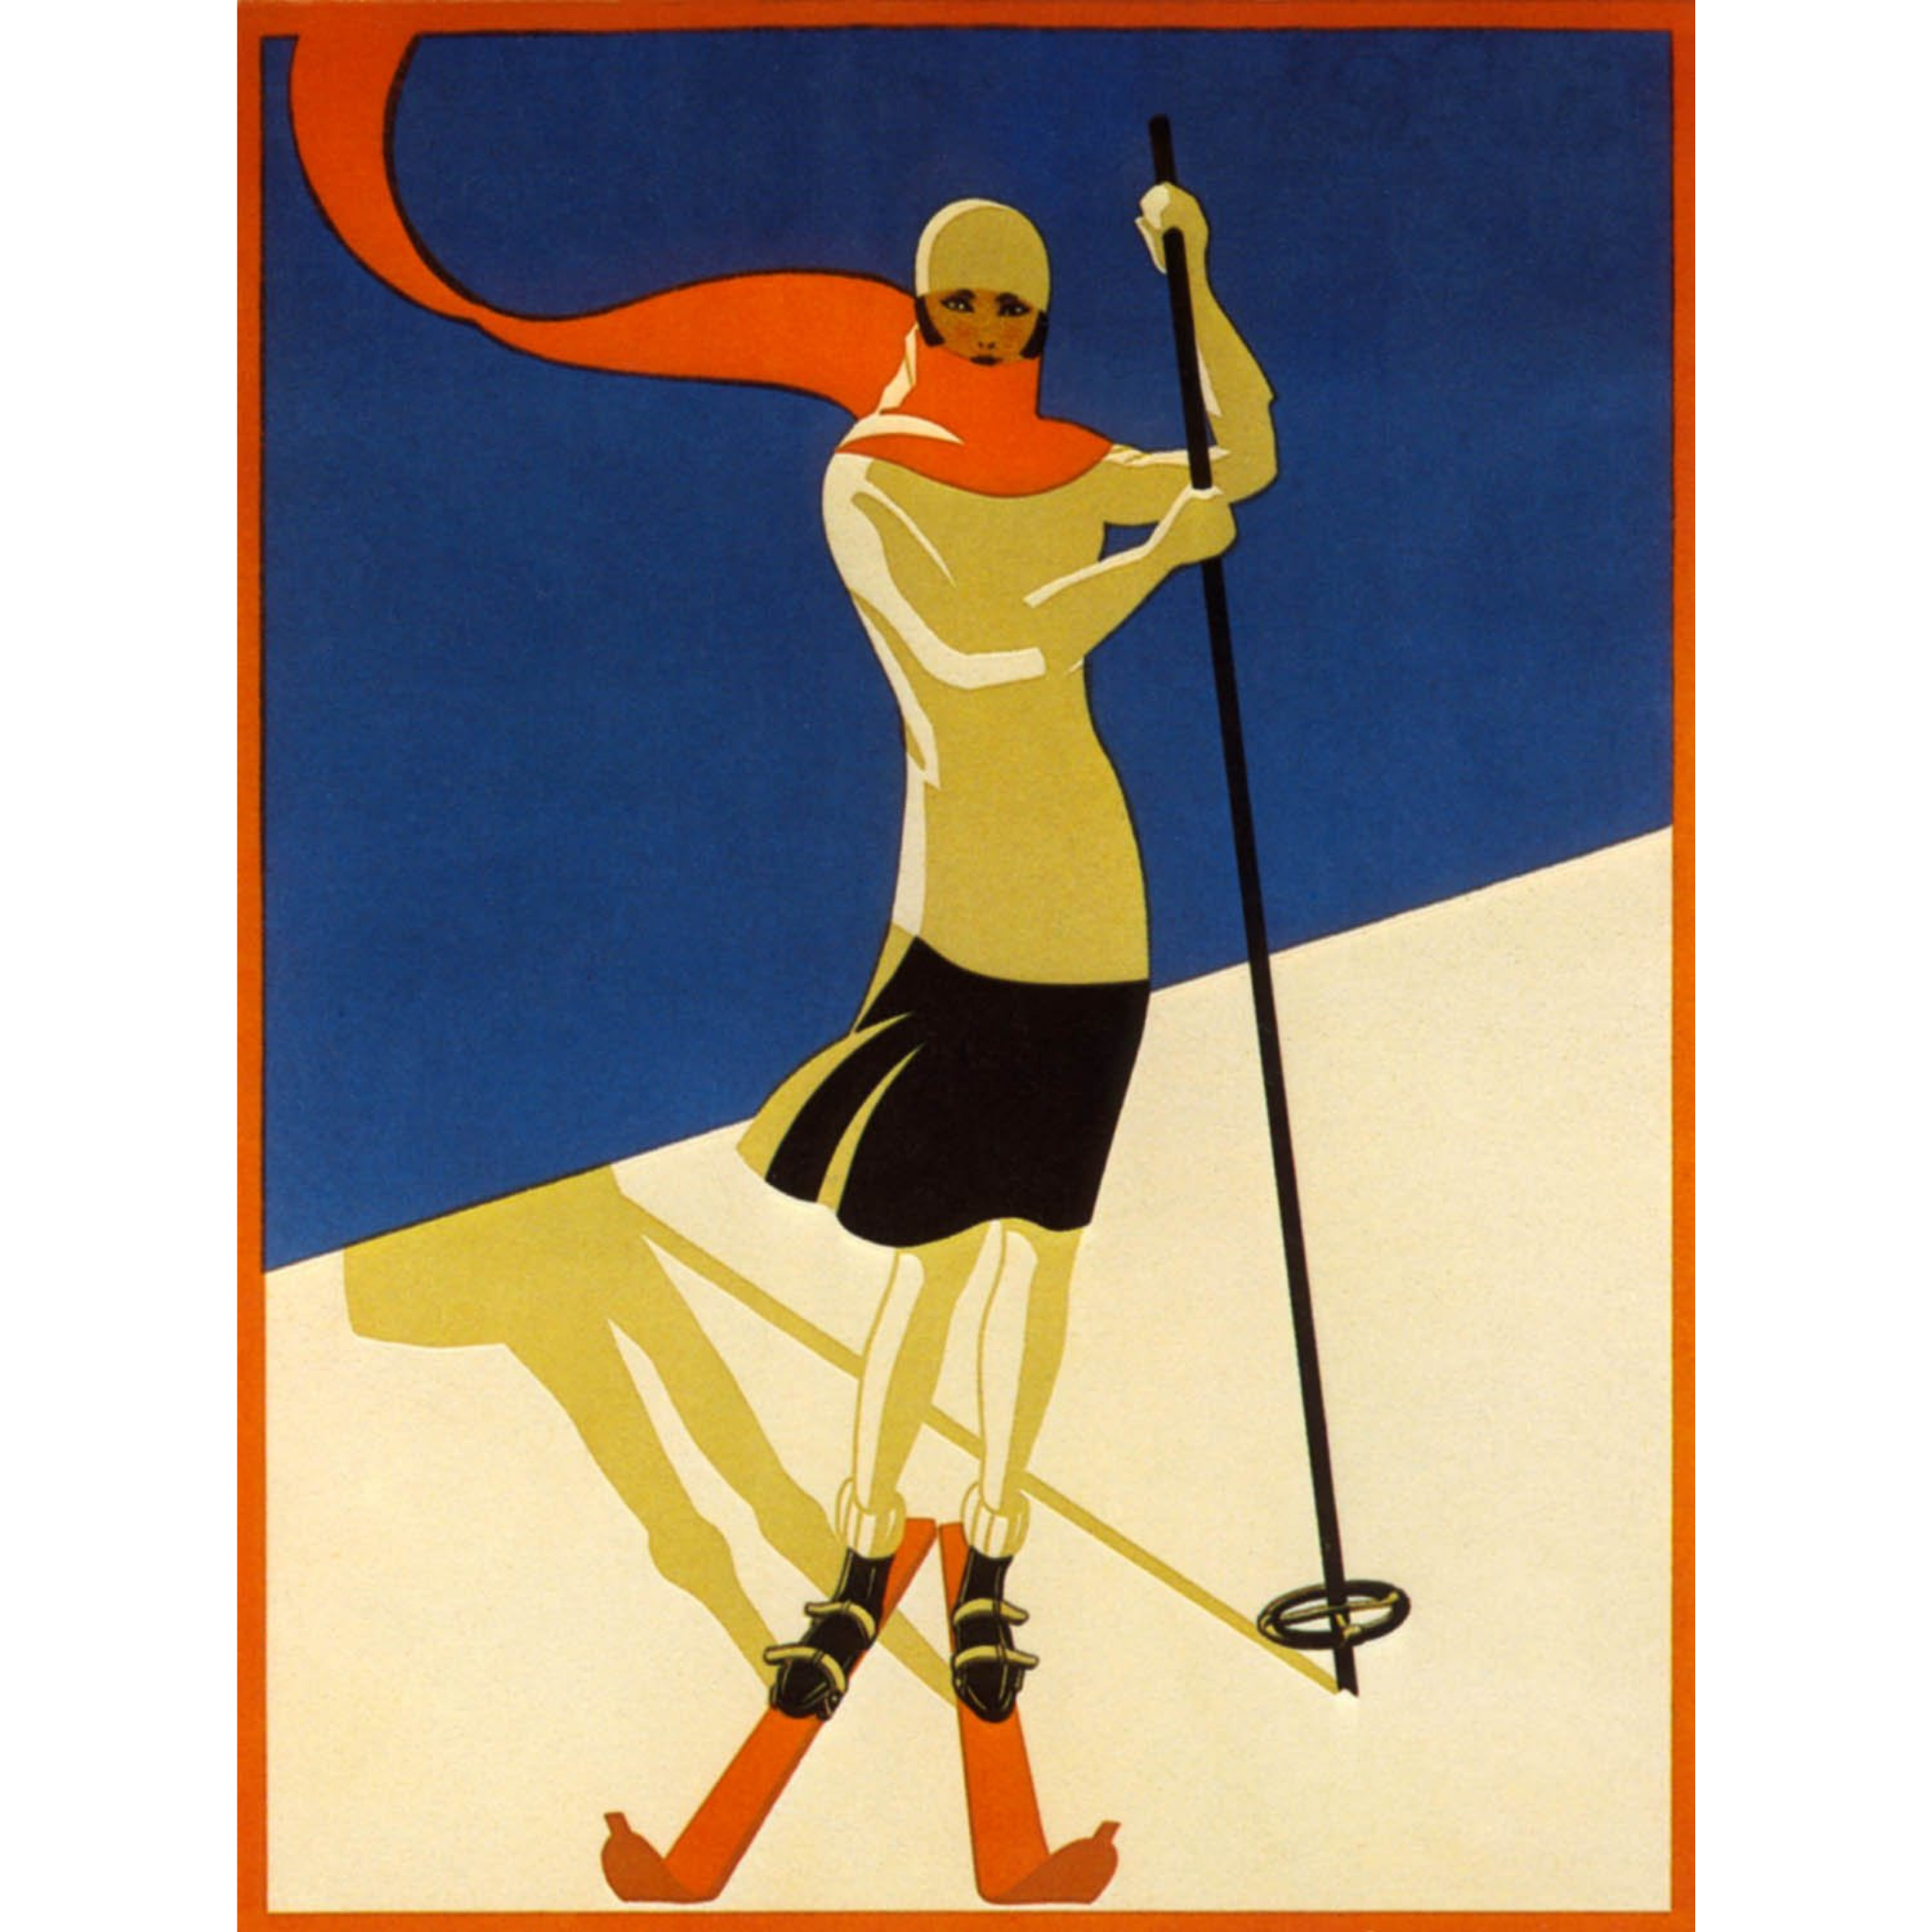 Art Deco Woman on Skis with Orange Scarf - ca. 1930 Serigraph